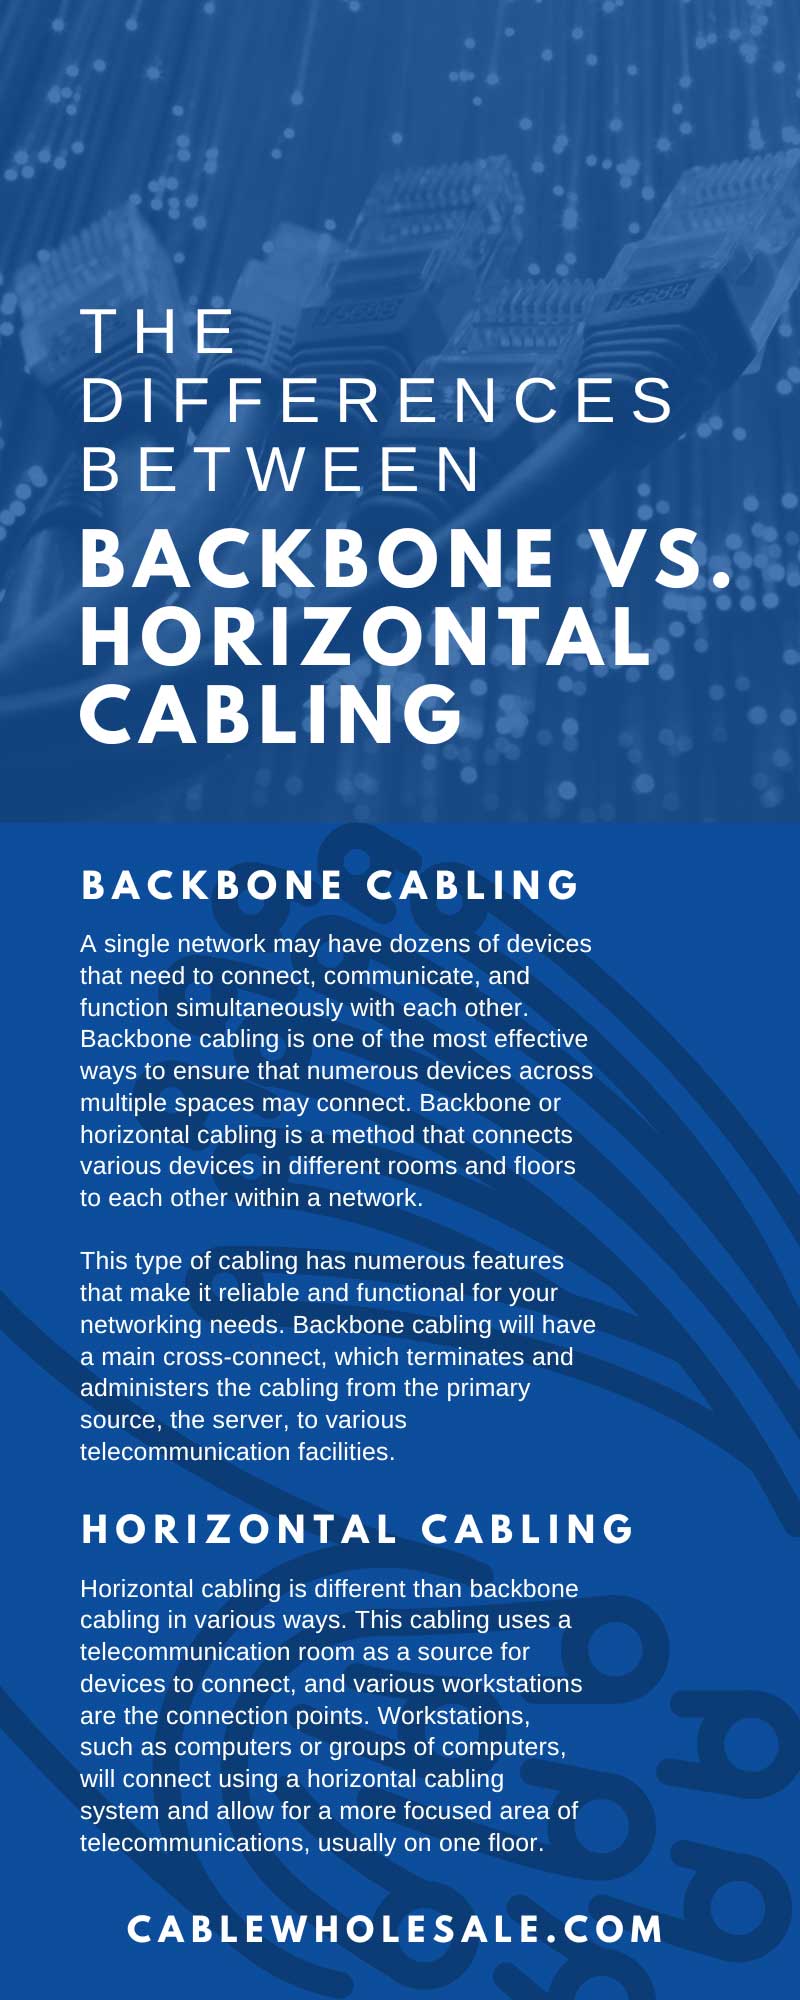 The Differences Between Backbone vs. Horizontal Cabling